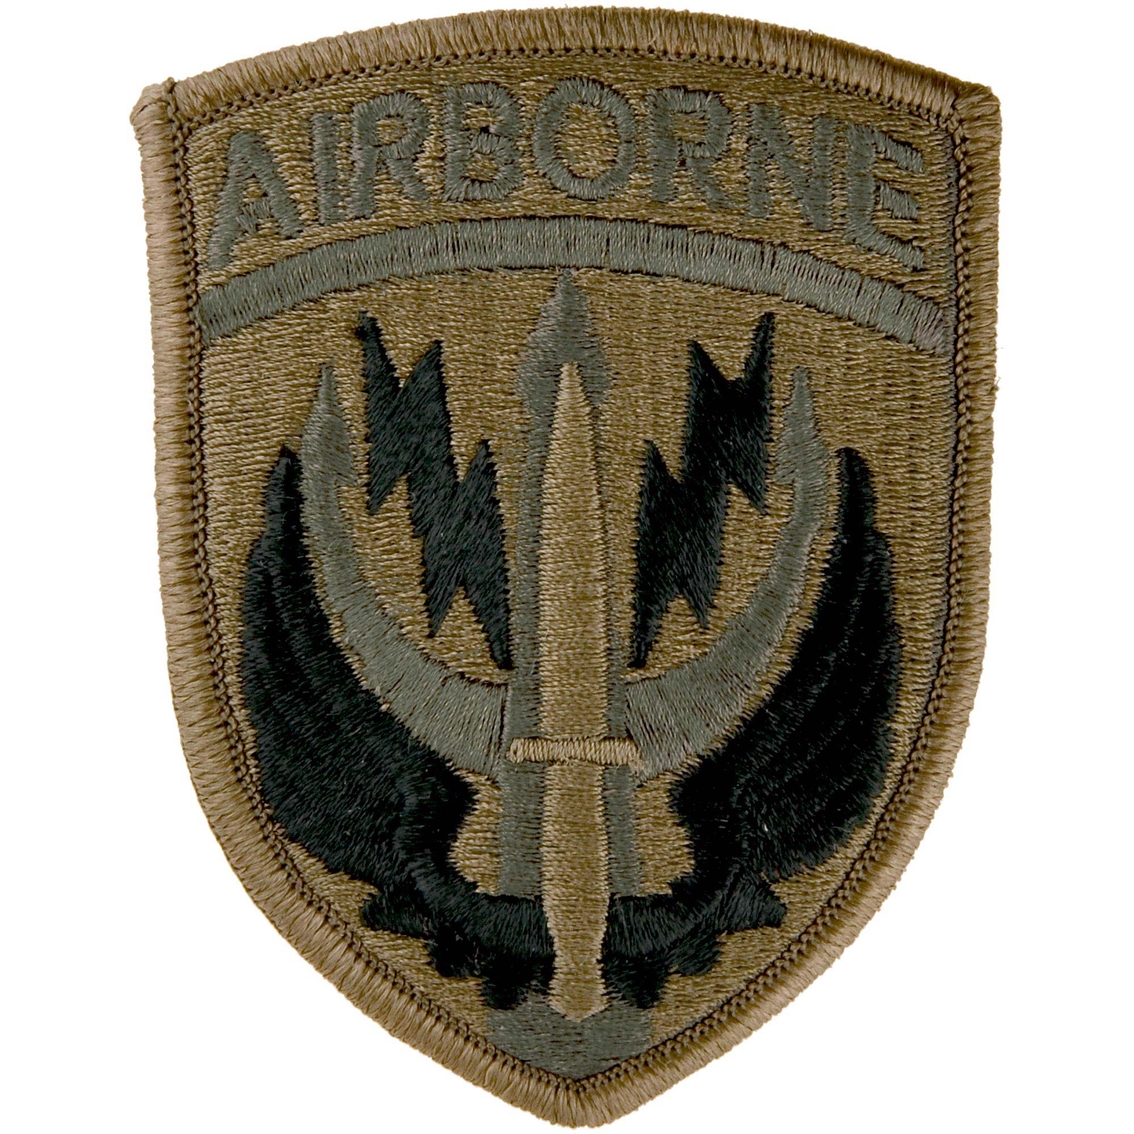 ARMY ELEMENT SPECIAL OPERATIONS COMMAND SOCOM  DESERT AUFNÄHER PATCH U.S 